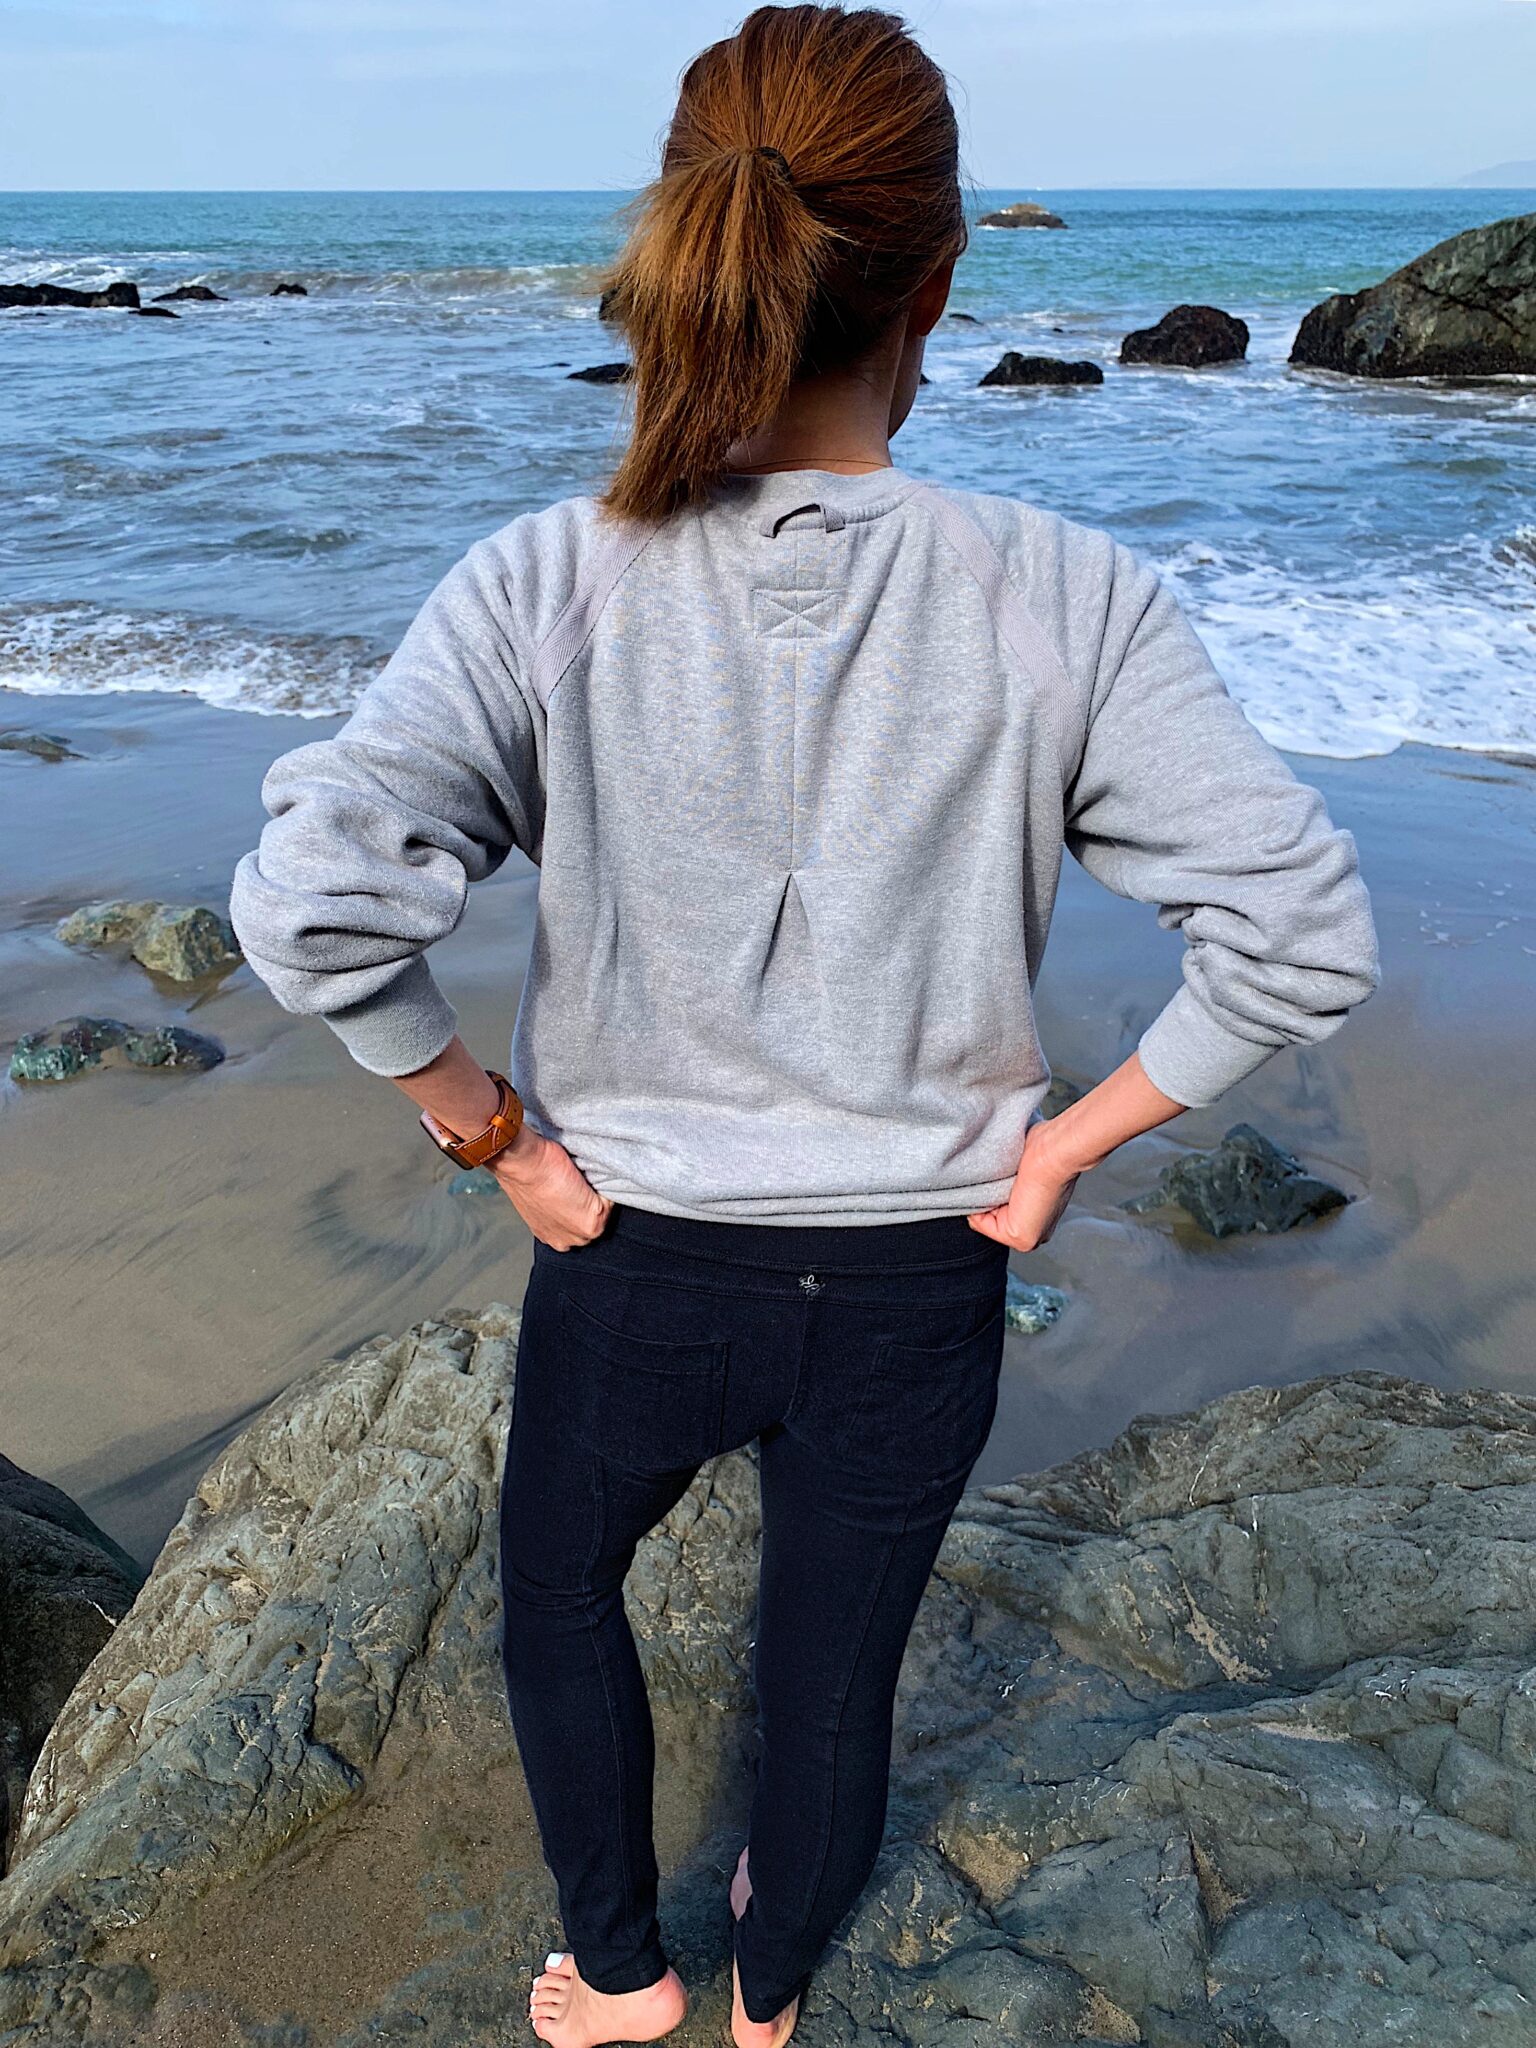 I love the prAna Briann Pant! Check it out and more at www.prAna